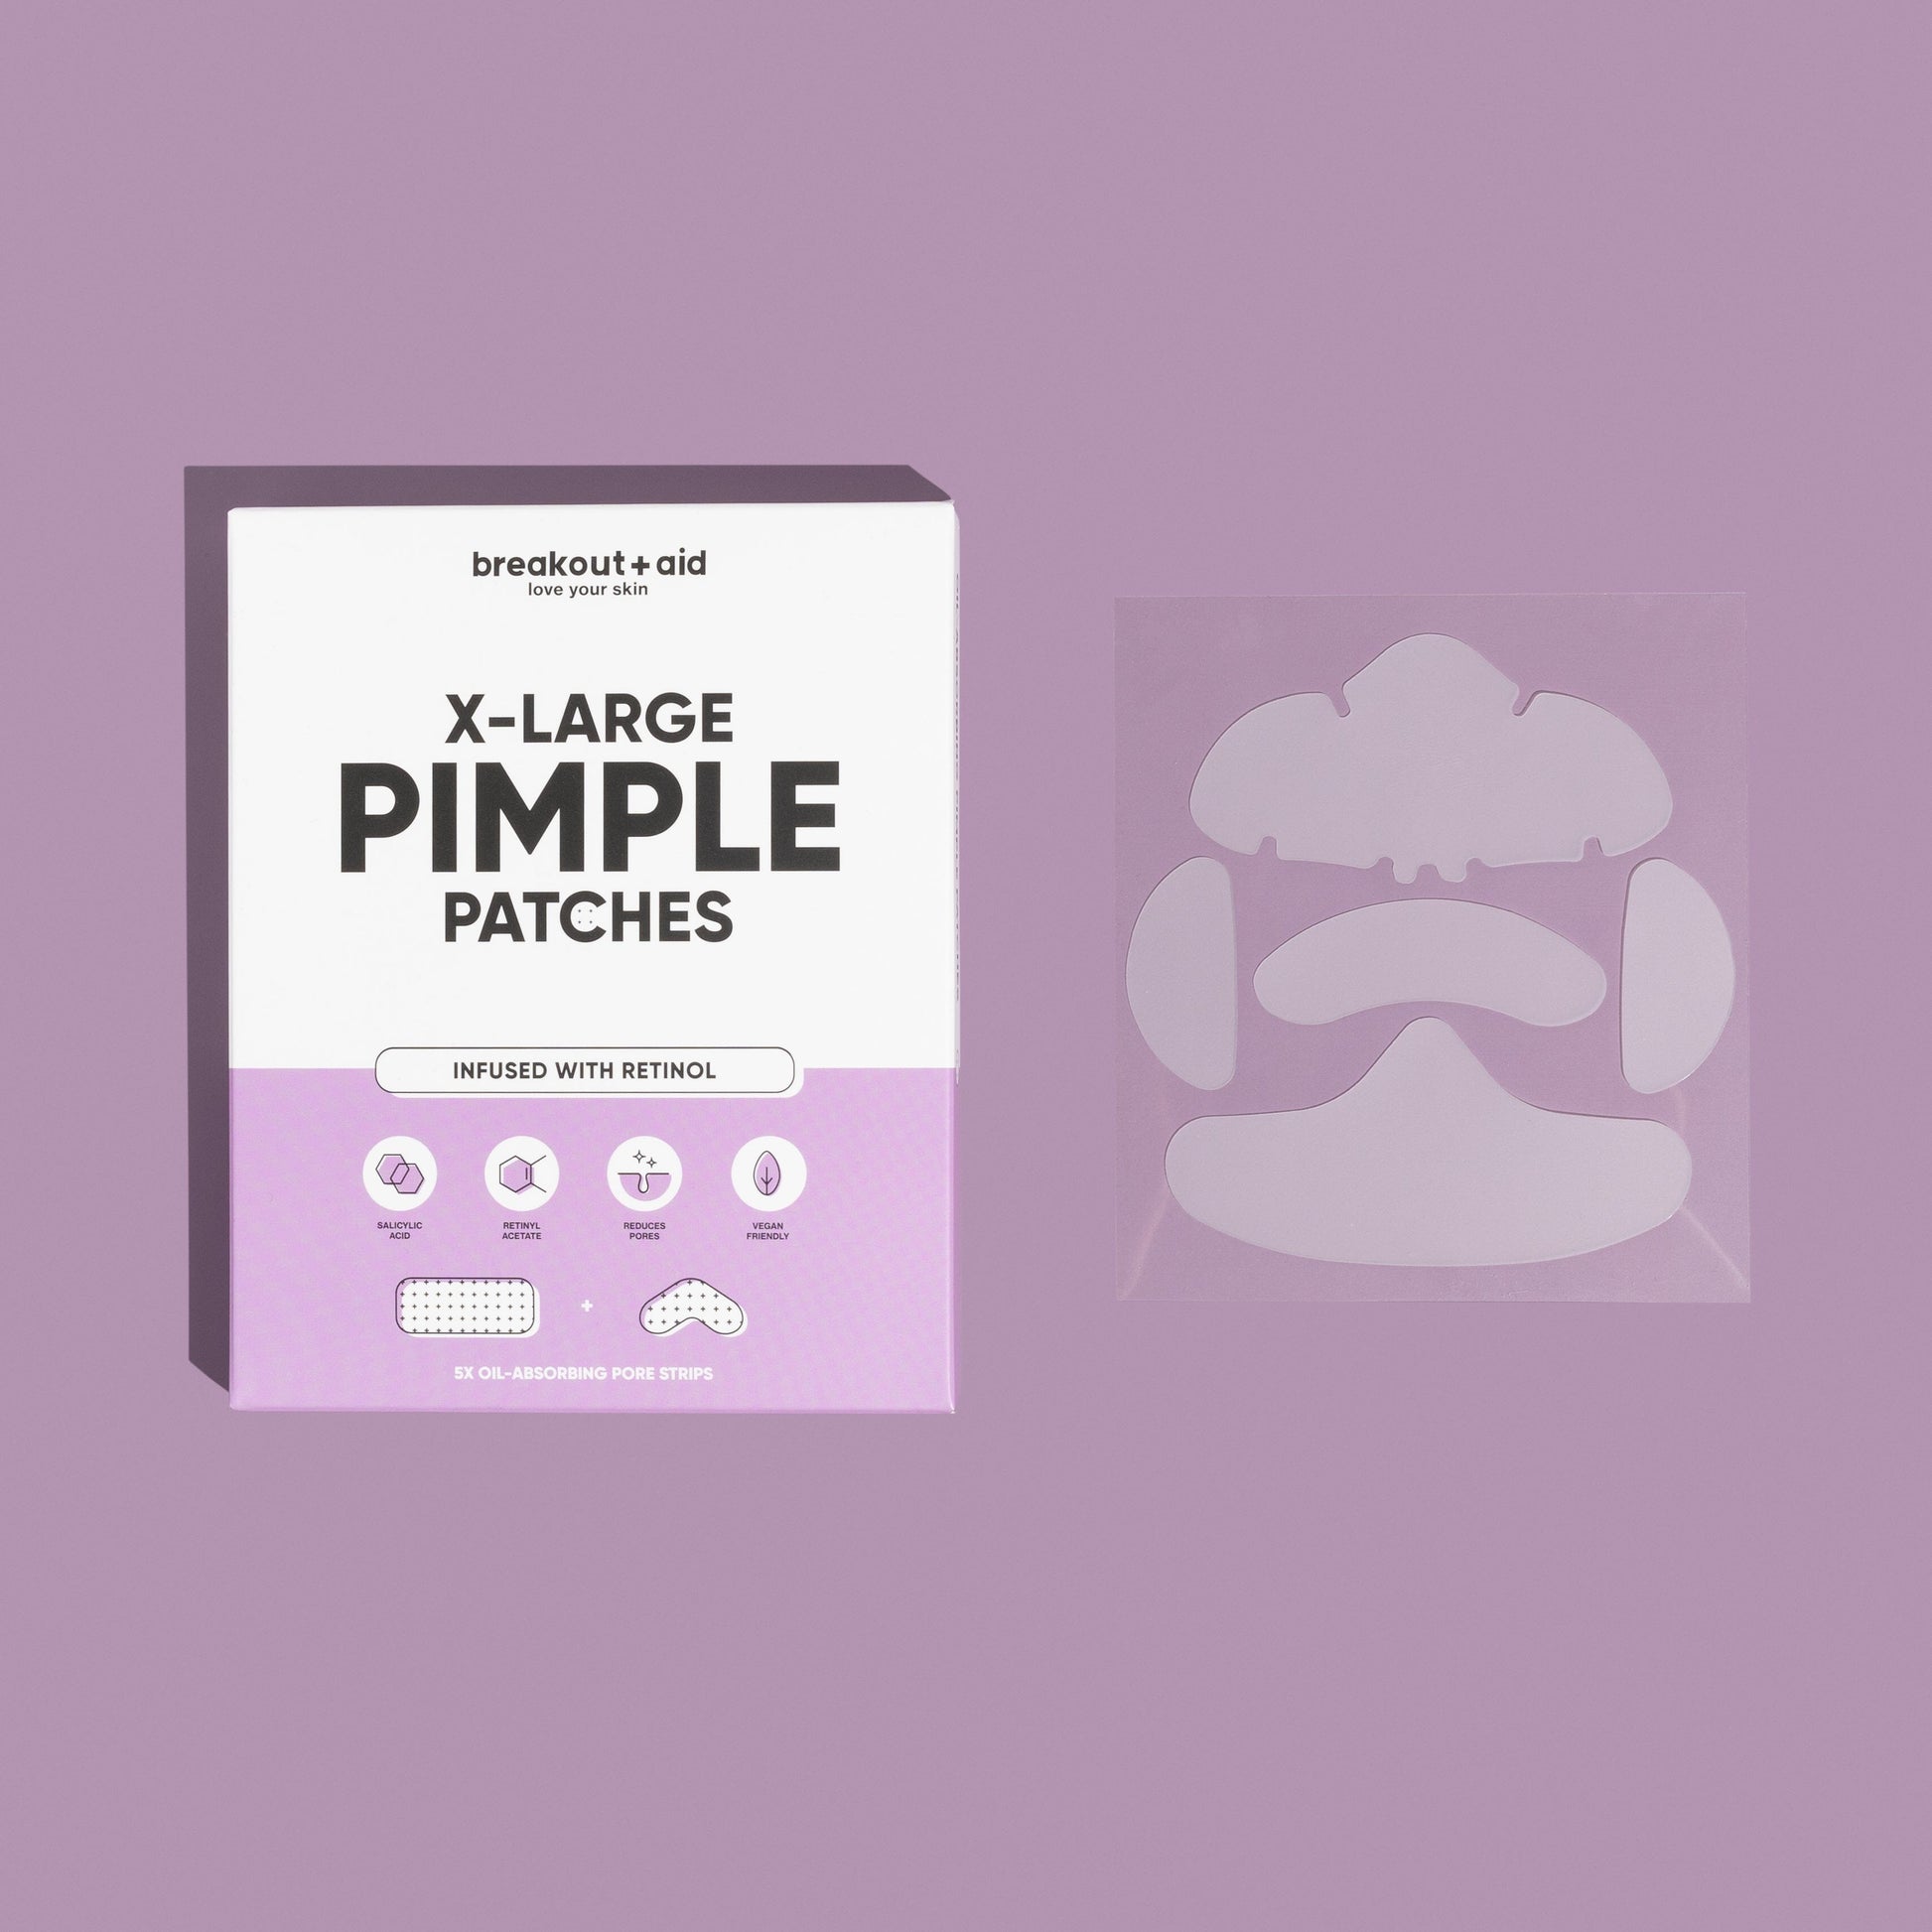 X-Large pimple patches infused with retinol, Salicylic acid. breakoutaid store 